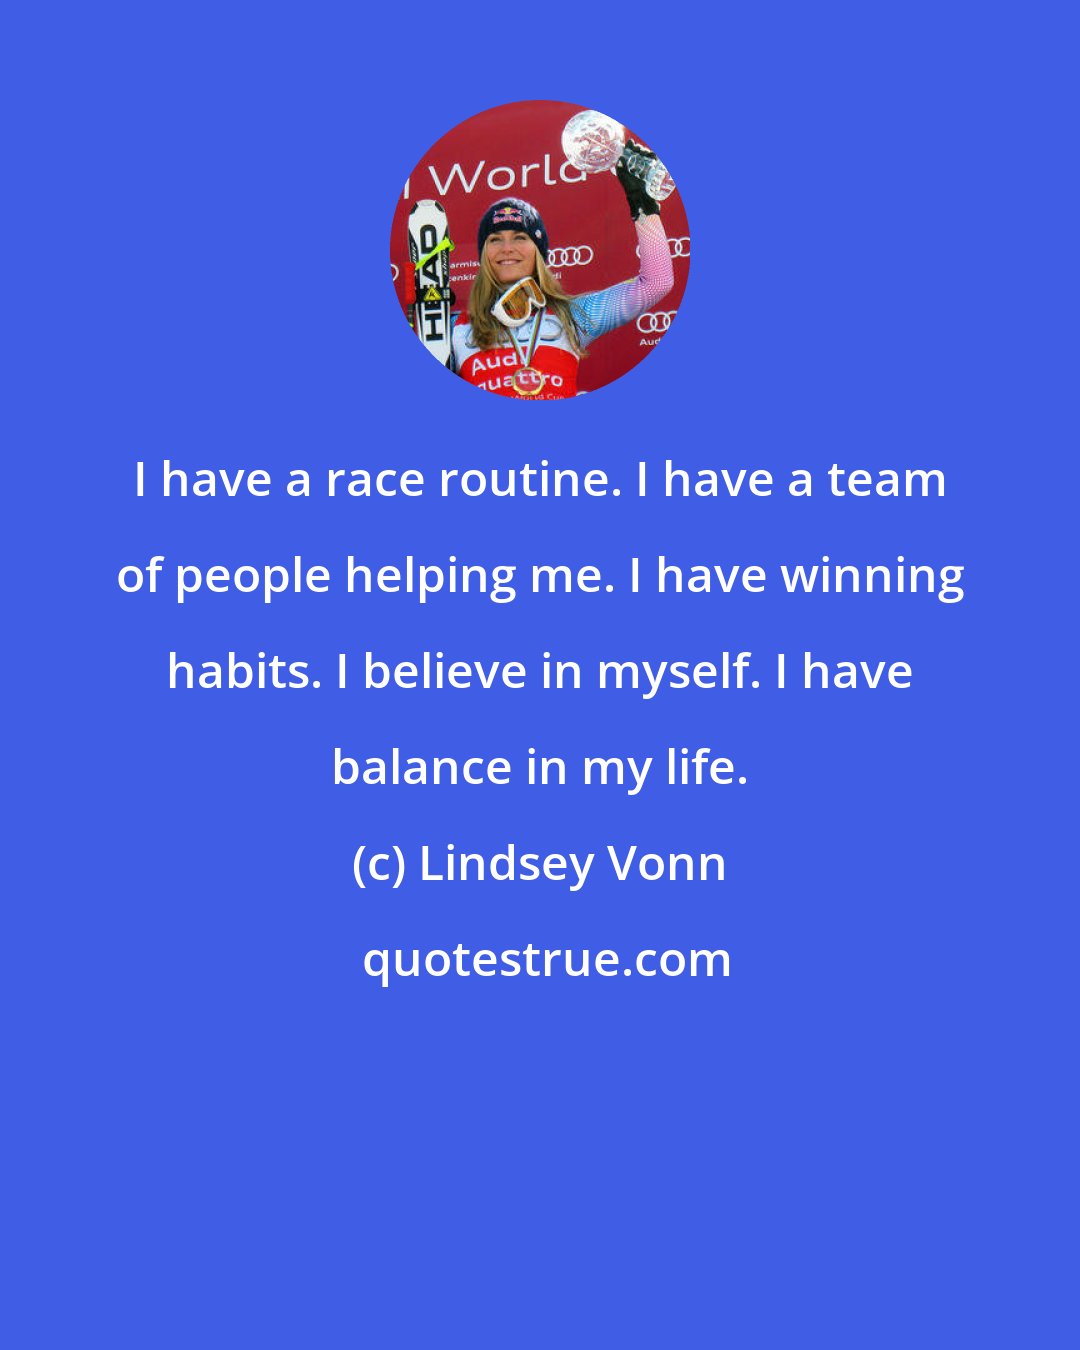 Lindsey Vonn: I have a race routine. I have a team of people helping me. I have winning habits. I believe in myself. I have balance in my life.